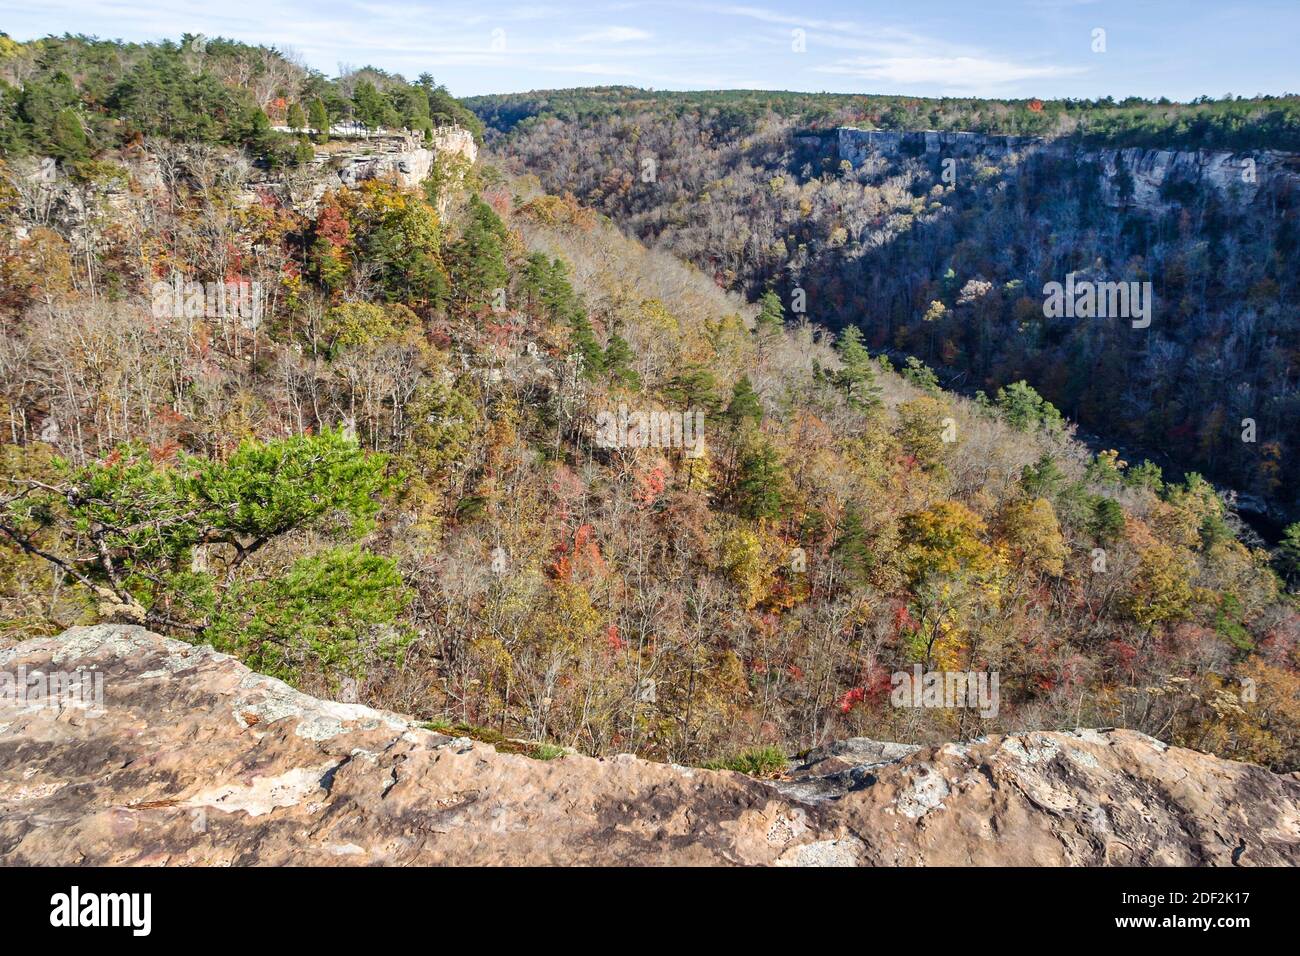 Alabama Lookout Mountain Little River Canyon National Preserve,nature natural scenery late fall overlook panaramic view, Stock Photo